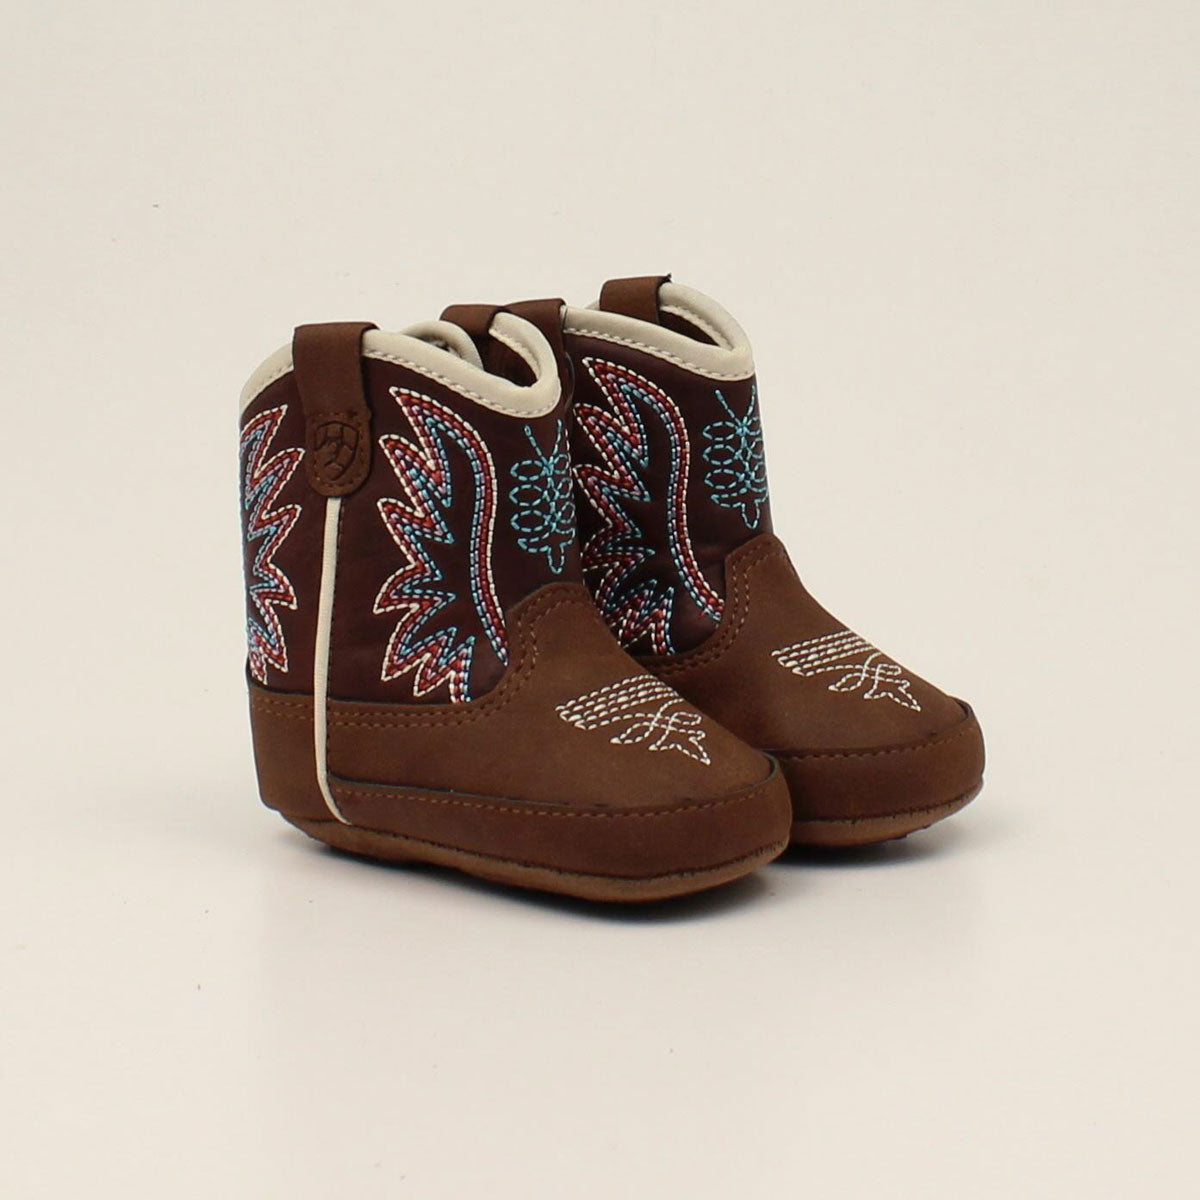 ARIAT LIL’ STOMPERS "BRIAR" INFANT BOOT